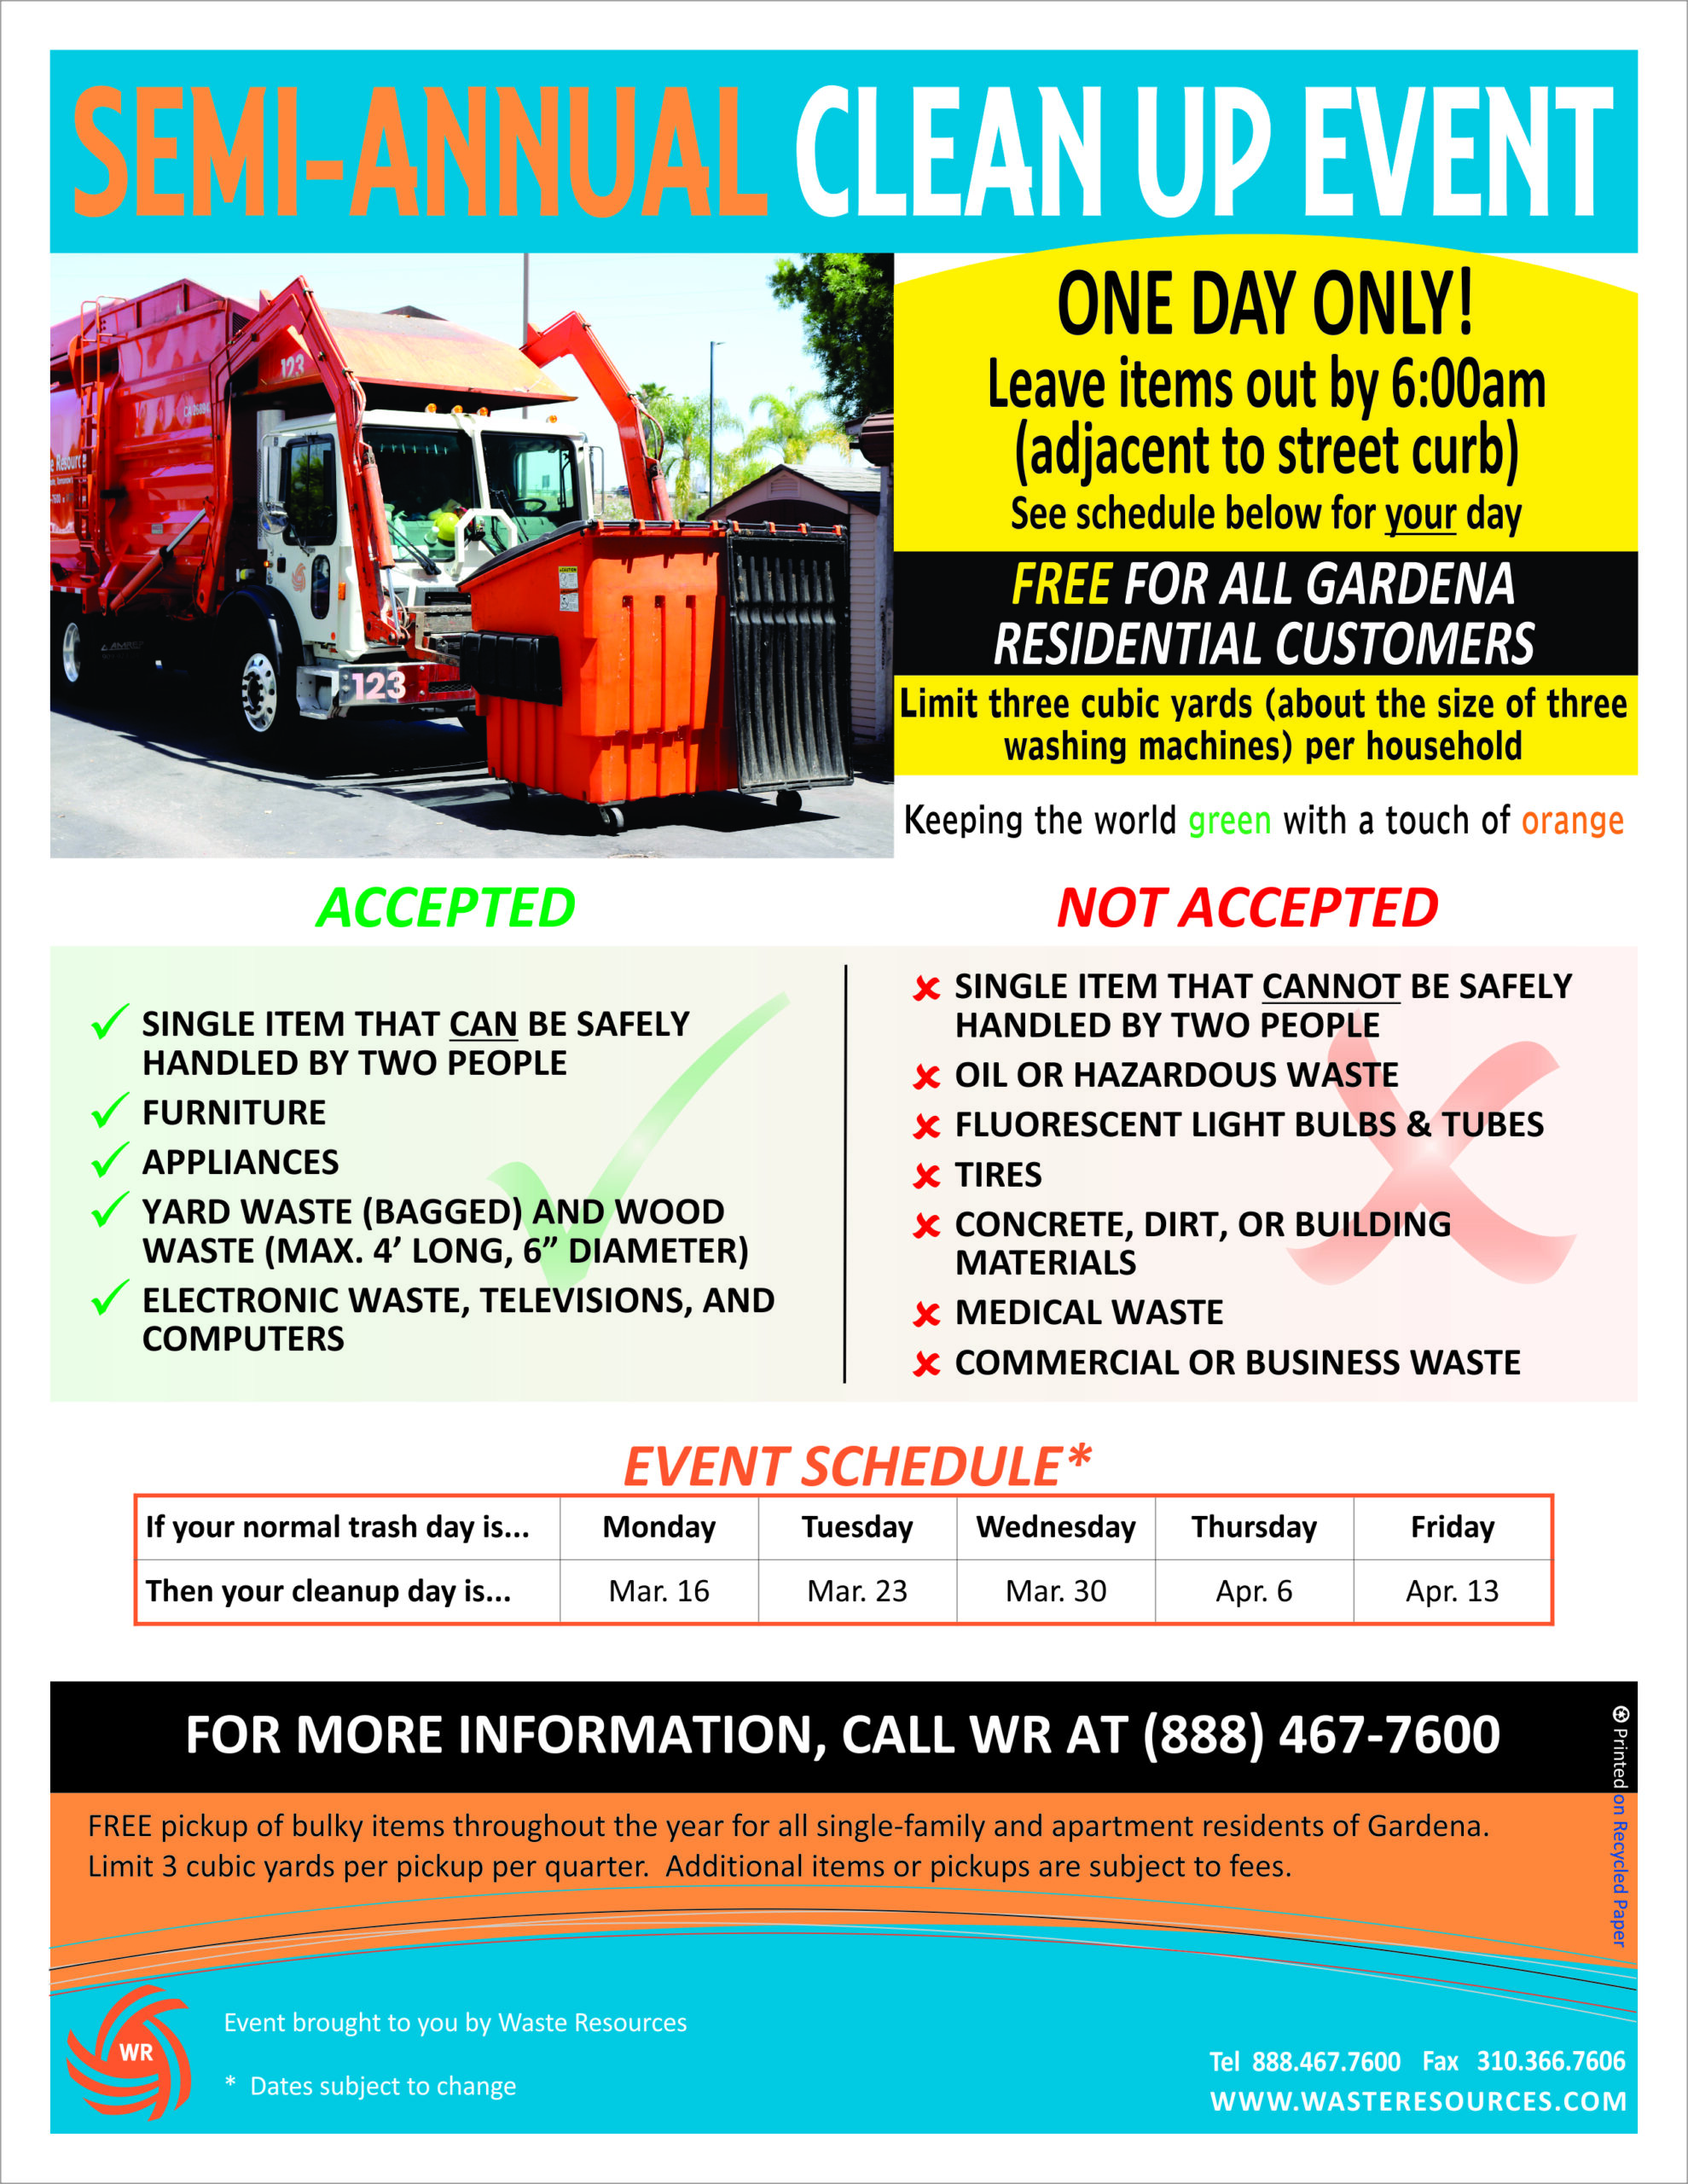 Semi-Annual Cleanup Starts in Gardena on March 16